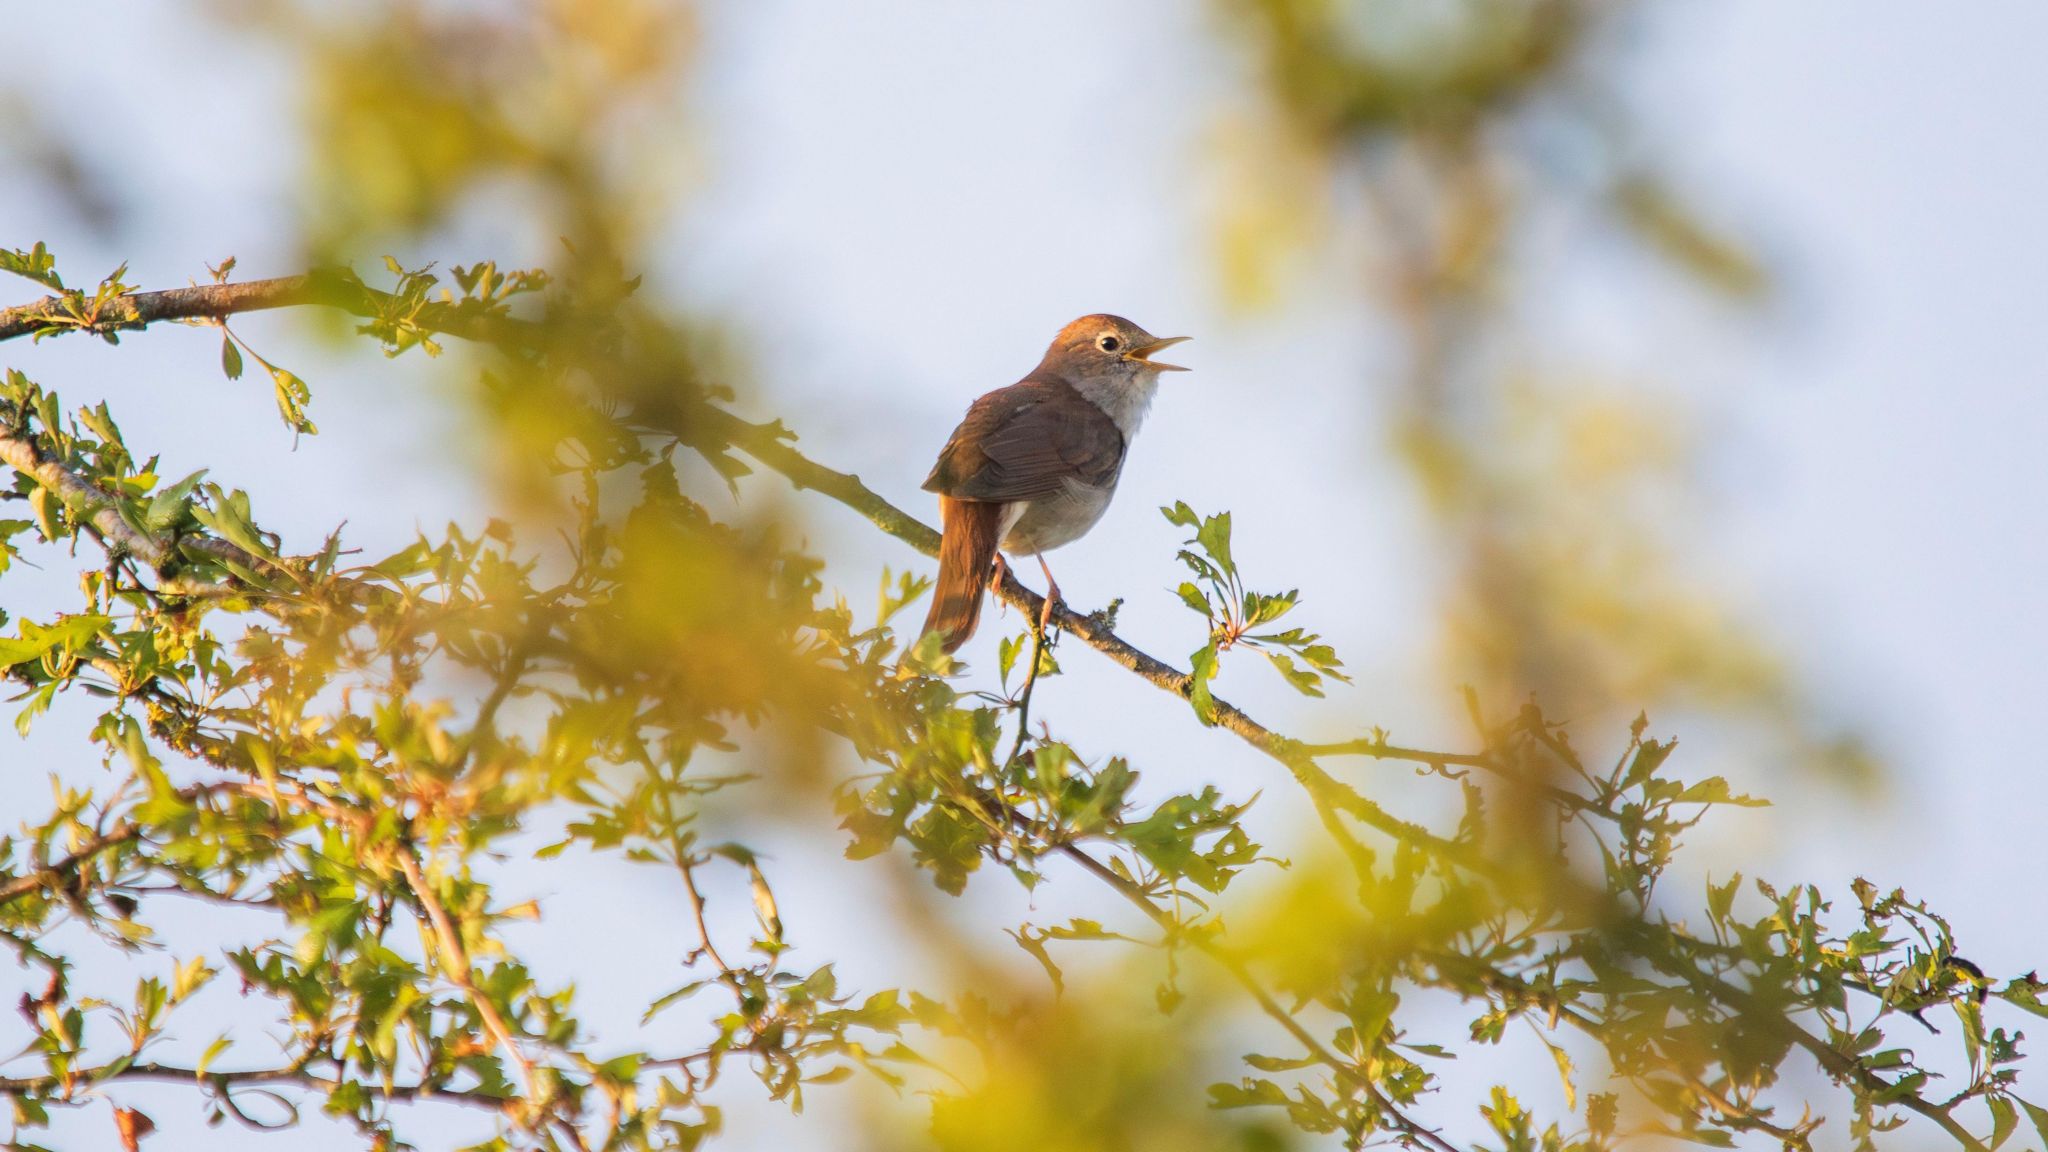 A nightingale at Strawberry Hill